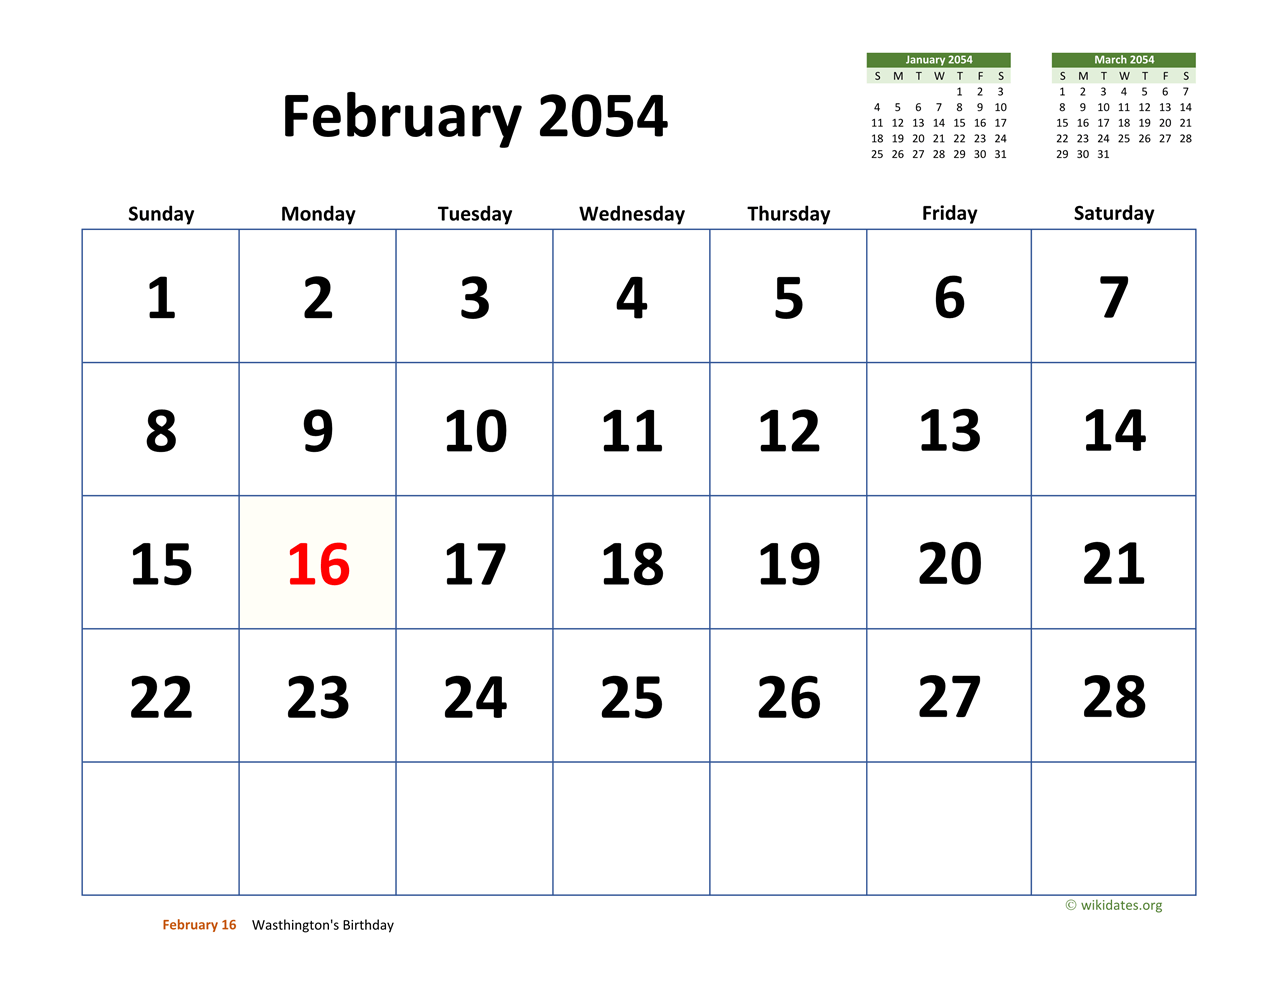 February 2054 Calendar with Extralarge Dates